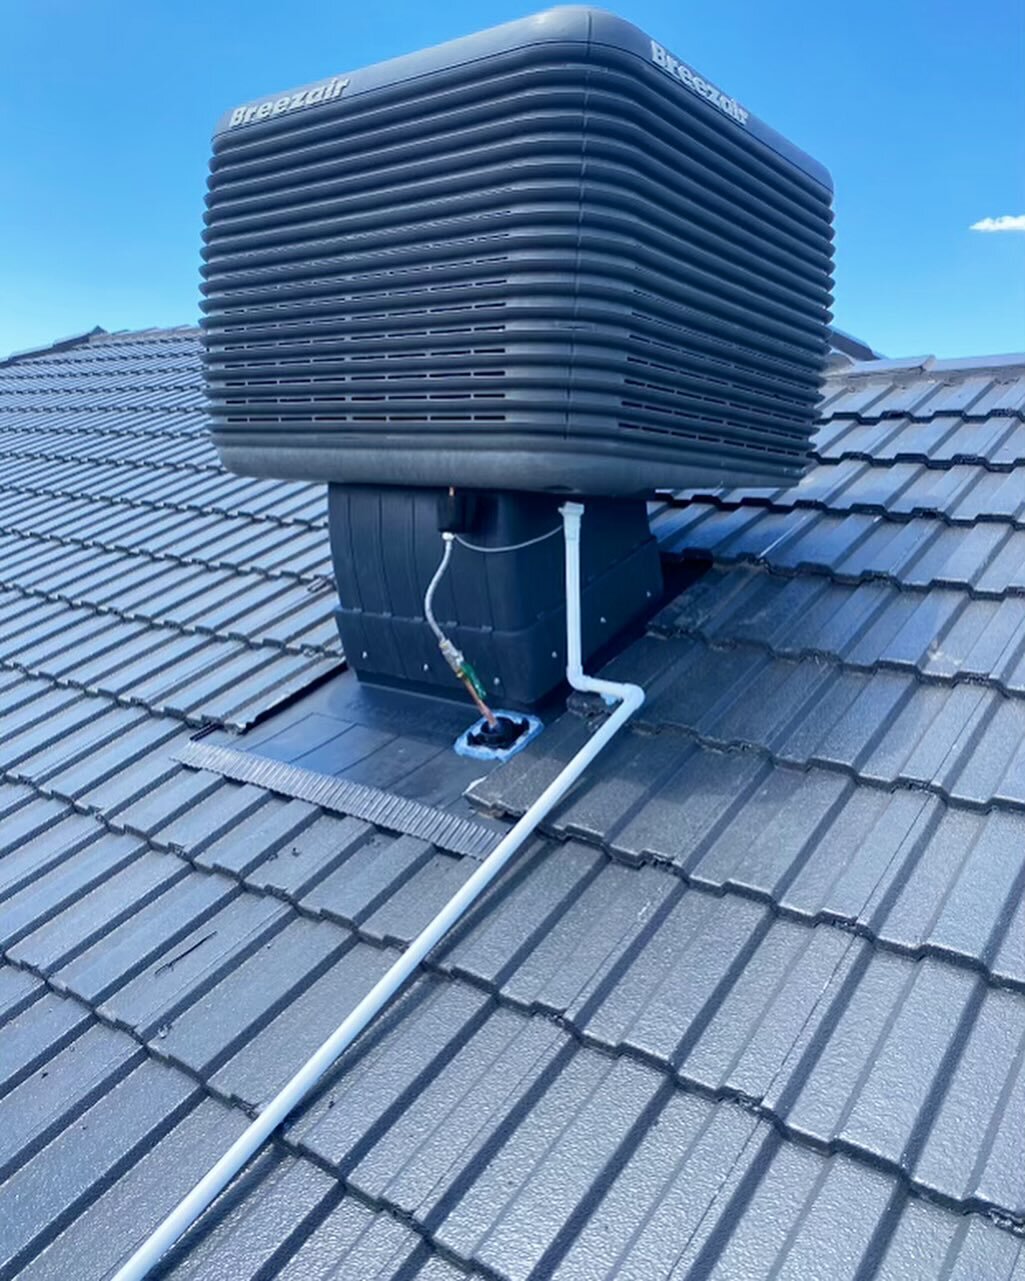 Replacement split system from a cooling only unit to a reverse cycle super efficient split system. Comfort all year round!⁣
⁣
⁣
#splitsystem #summer #melbourne